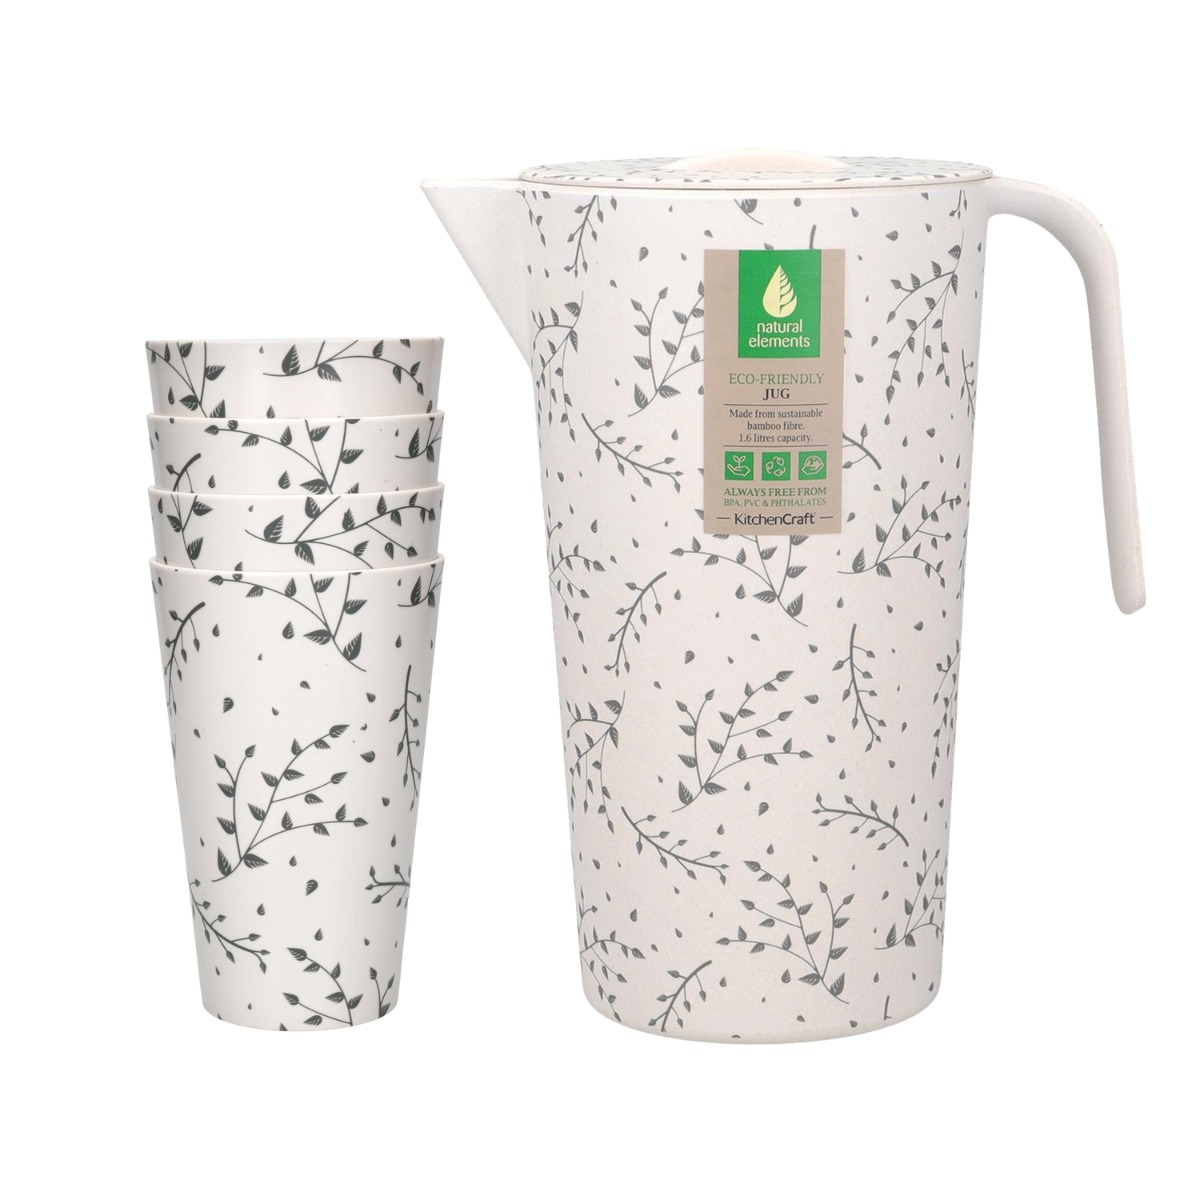 Natural Elements Eco-Friendly Recycled Plastic Pitcher & Tumblers Set